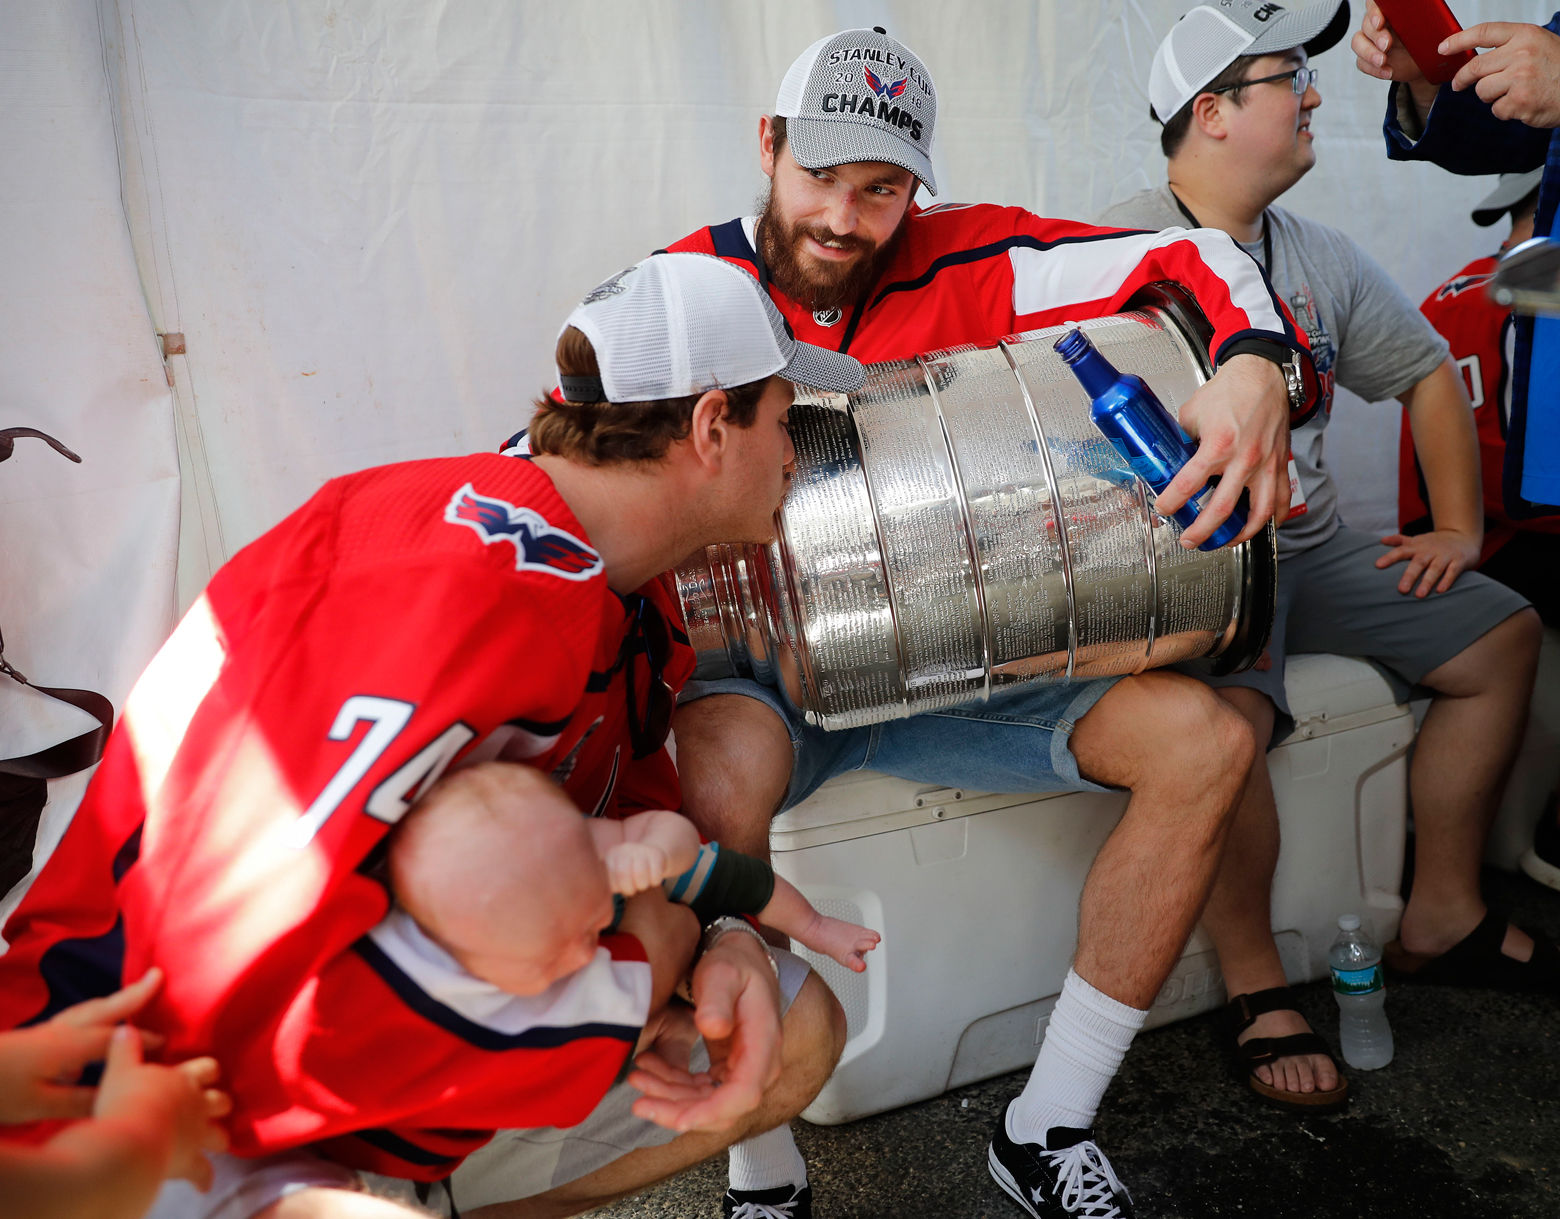 John Carlson (74), left, kisses the Stanley Cup held by teammate defenseman Michal Kempny (6), of the Czech Republic, as they wait to take the stage for the Stanley Cup victory celebration in Washington, Tuesday, June 12, 2018. (AP Photo/Pablo Martinez Monsivais)